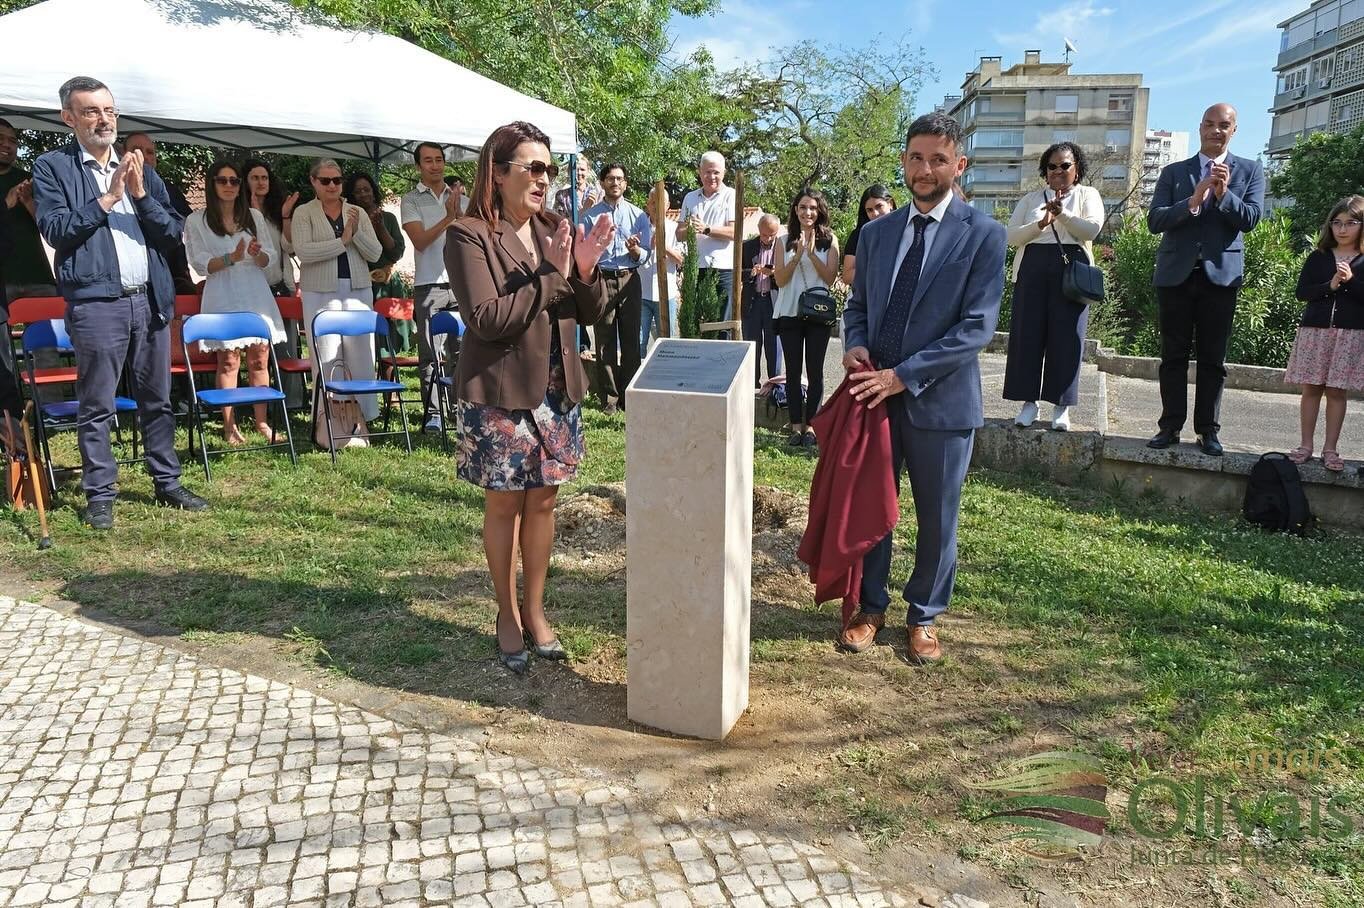 Reflecting on a touching moment in Lisbon, Portugal: where an official inauguration of 10 trees were planted in memory of the 10 Bah&aacute;&rsquo;&iacute; women of Shiraz. Each tree stands tall, adorned with tribute plaques bearing the names of the 